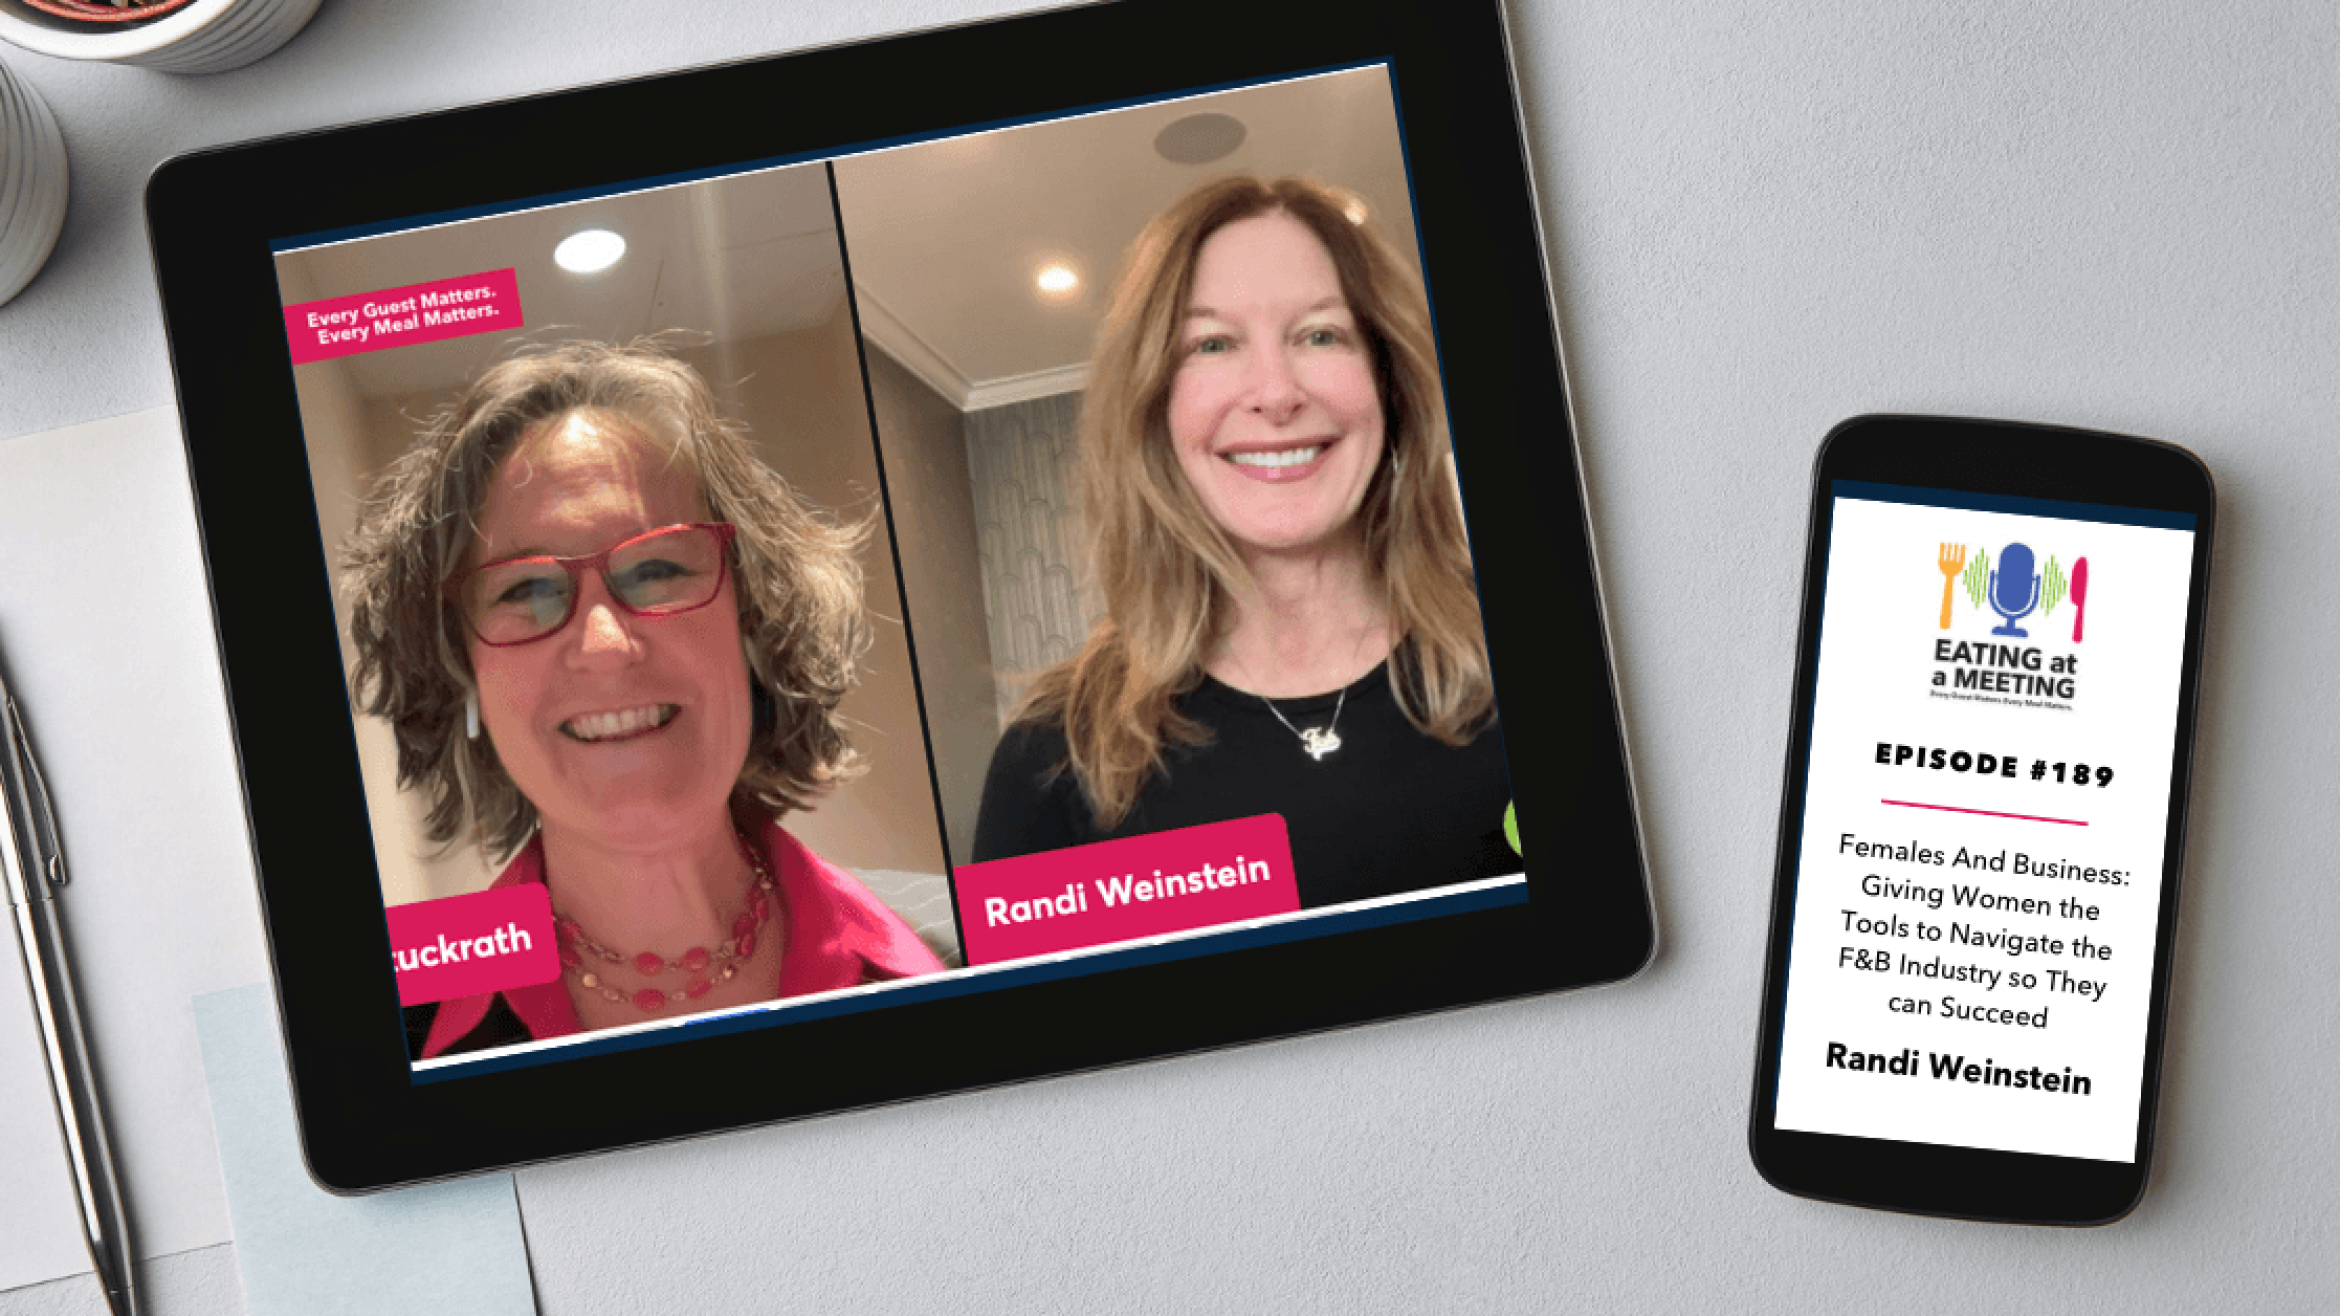 An iPad and iPhone on a table. On the iPad is a picture of a woman and a man who are on video screen. On the iPhone is the Eating at a Meeting podcast logo with Episode #189 FAB: Giving Women Tools to Navigate the F&B Industry and Succeed with Randi Weinstein of FAB.